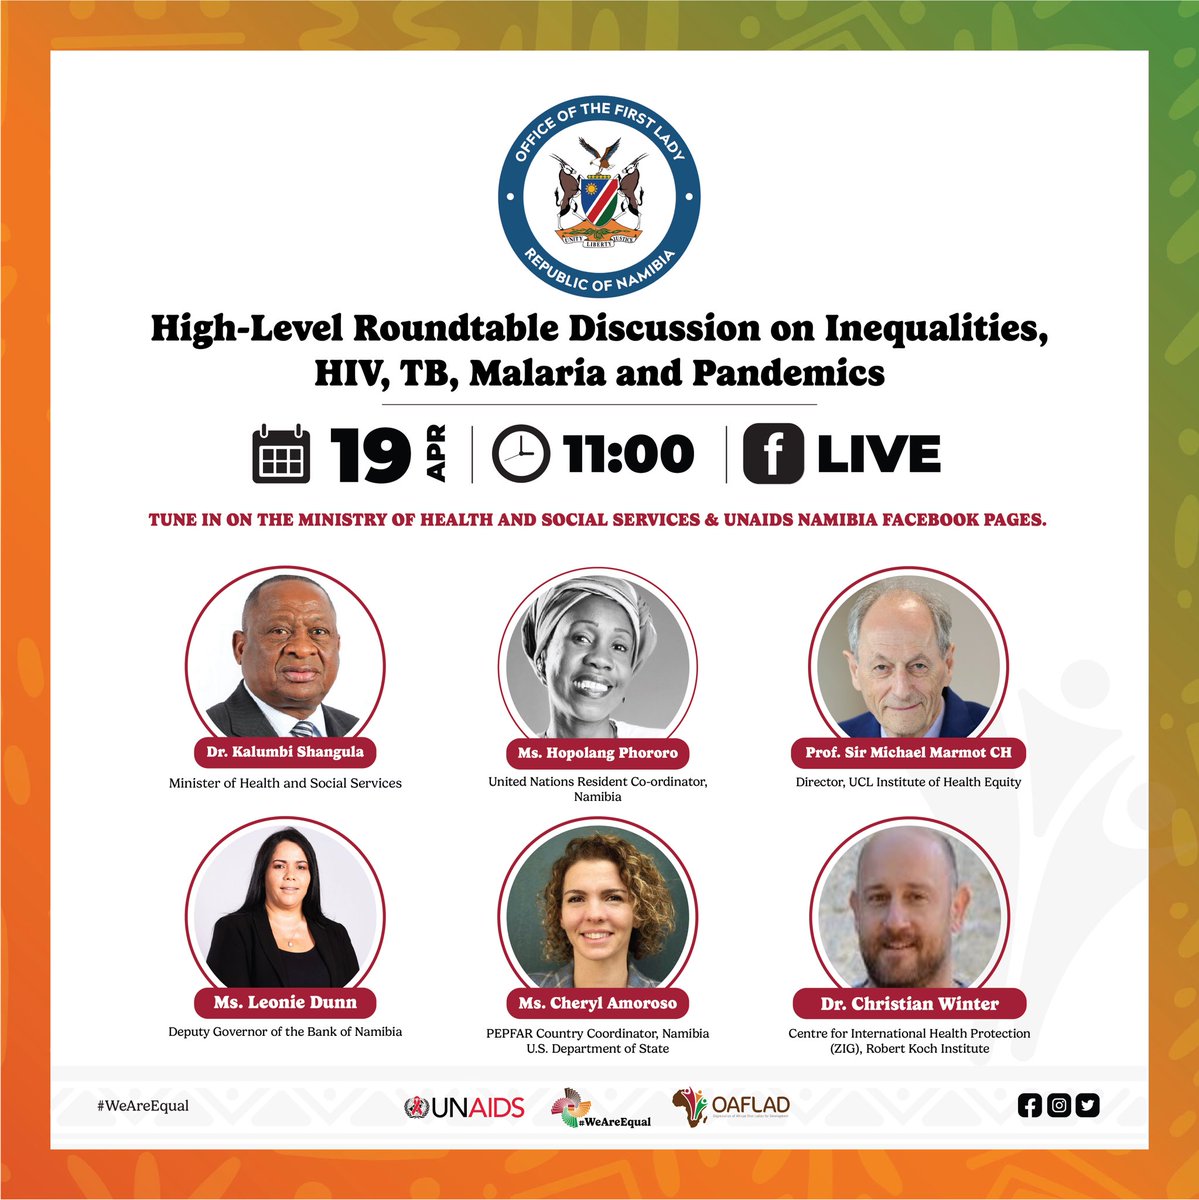 Today, First Lady Madam Sustjie Mbumba and @UnaidsNamibia host a High-Level Roundtable discussion on Inequalities, HIV, TB, Malaria and Pandemics at the State House. ▶️ Tune in to @MhssNamibia and @UnaidsNamibia at 11:00 on Facebook Live to join the discussion. #EndAIDS2030